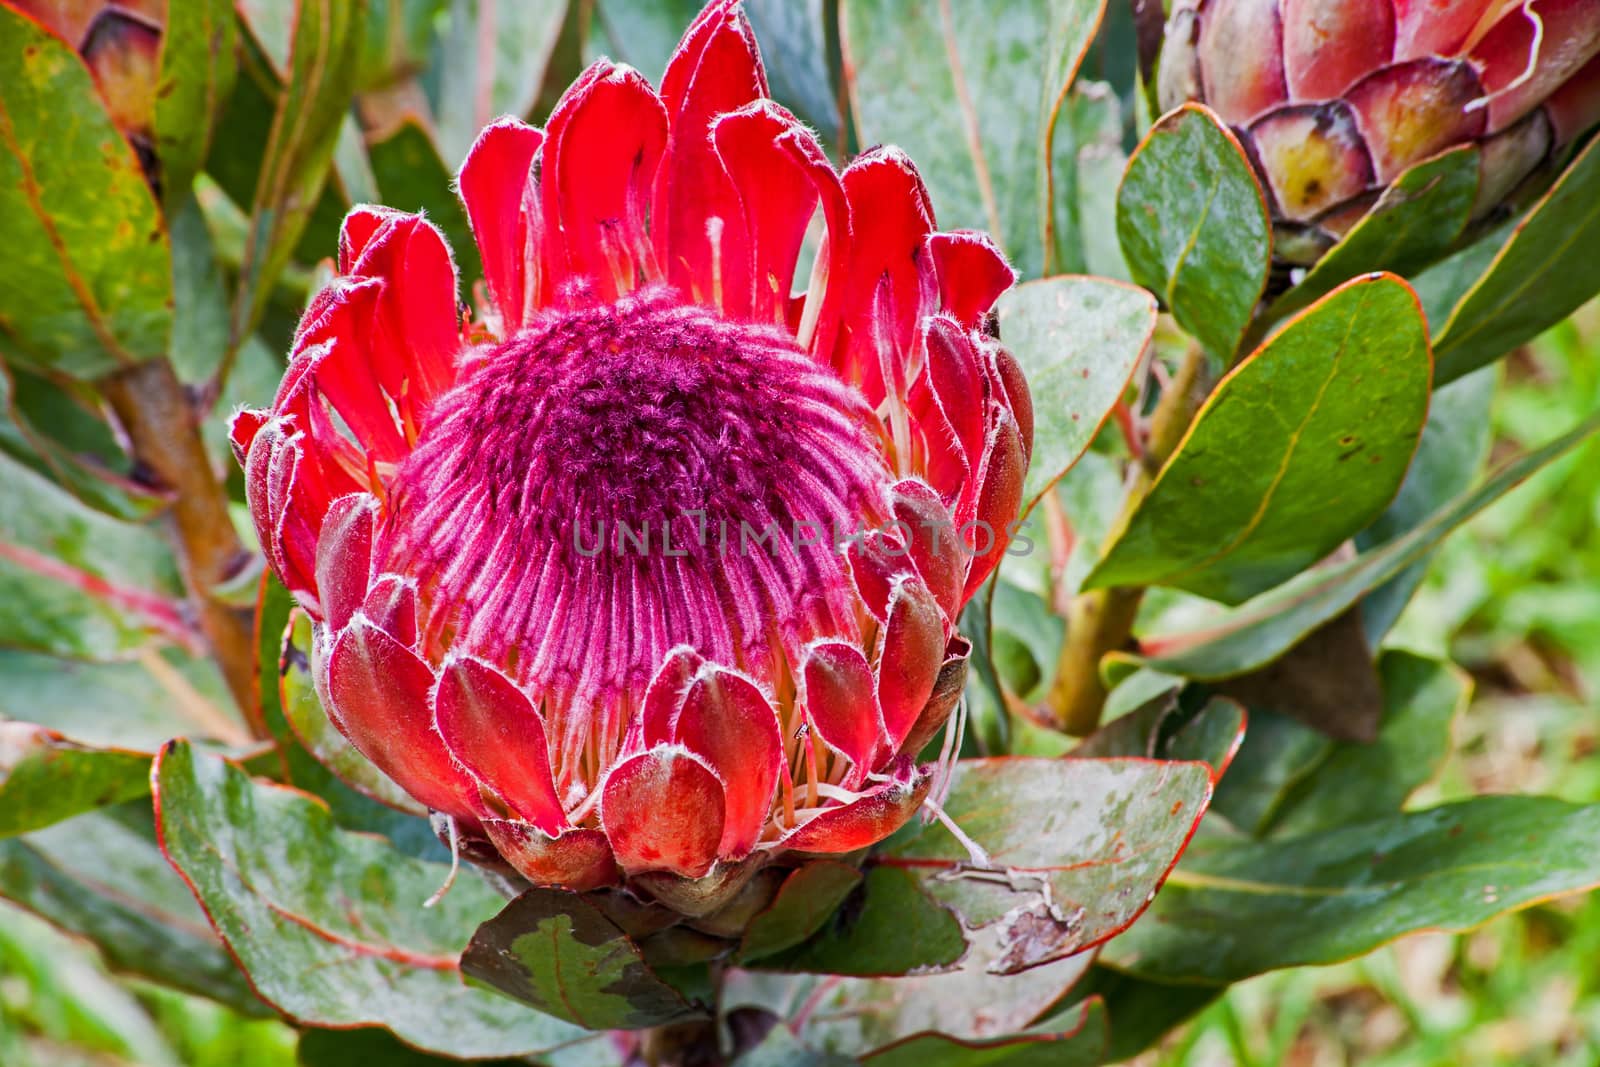 Mackro photo of a single red Protea flower with green leaves